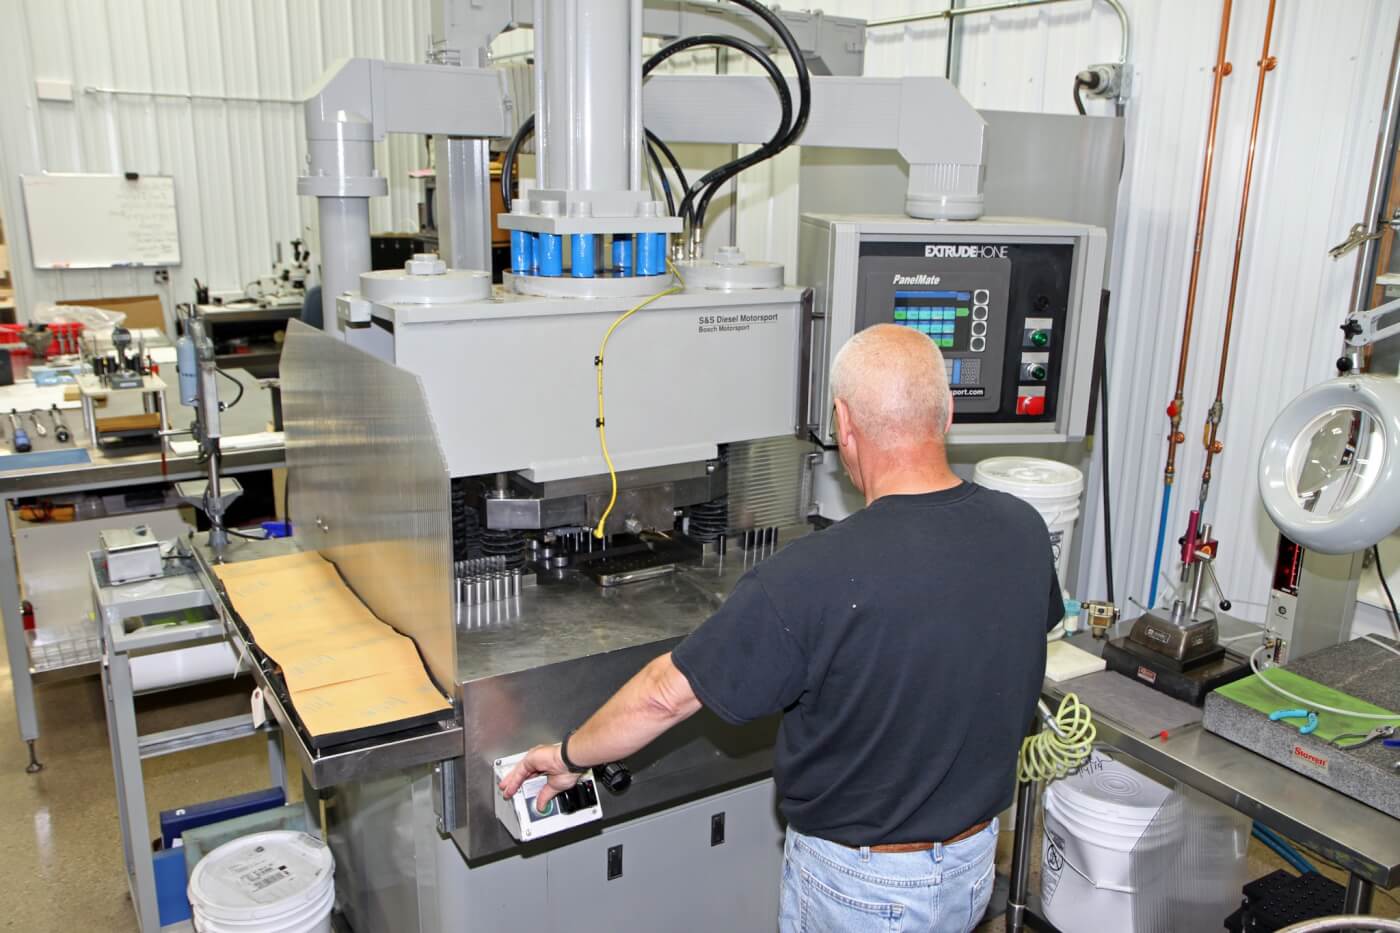 10. Greg Spoolstra operates the AFM machine to show us the process S&S nozzles go through.